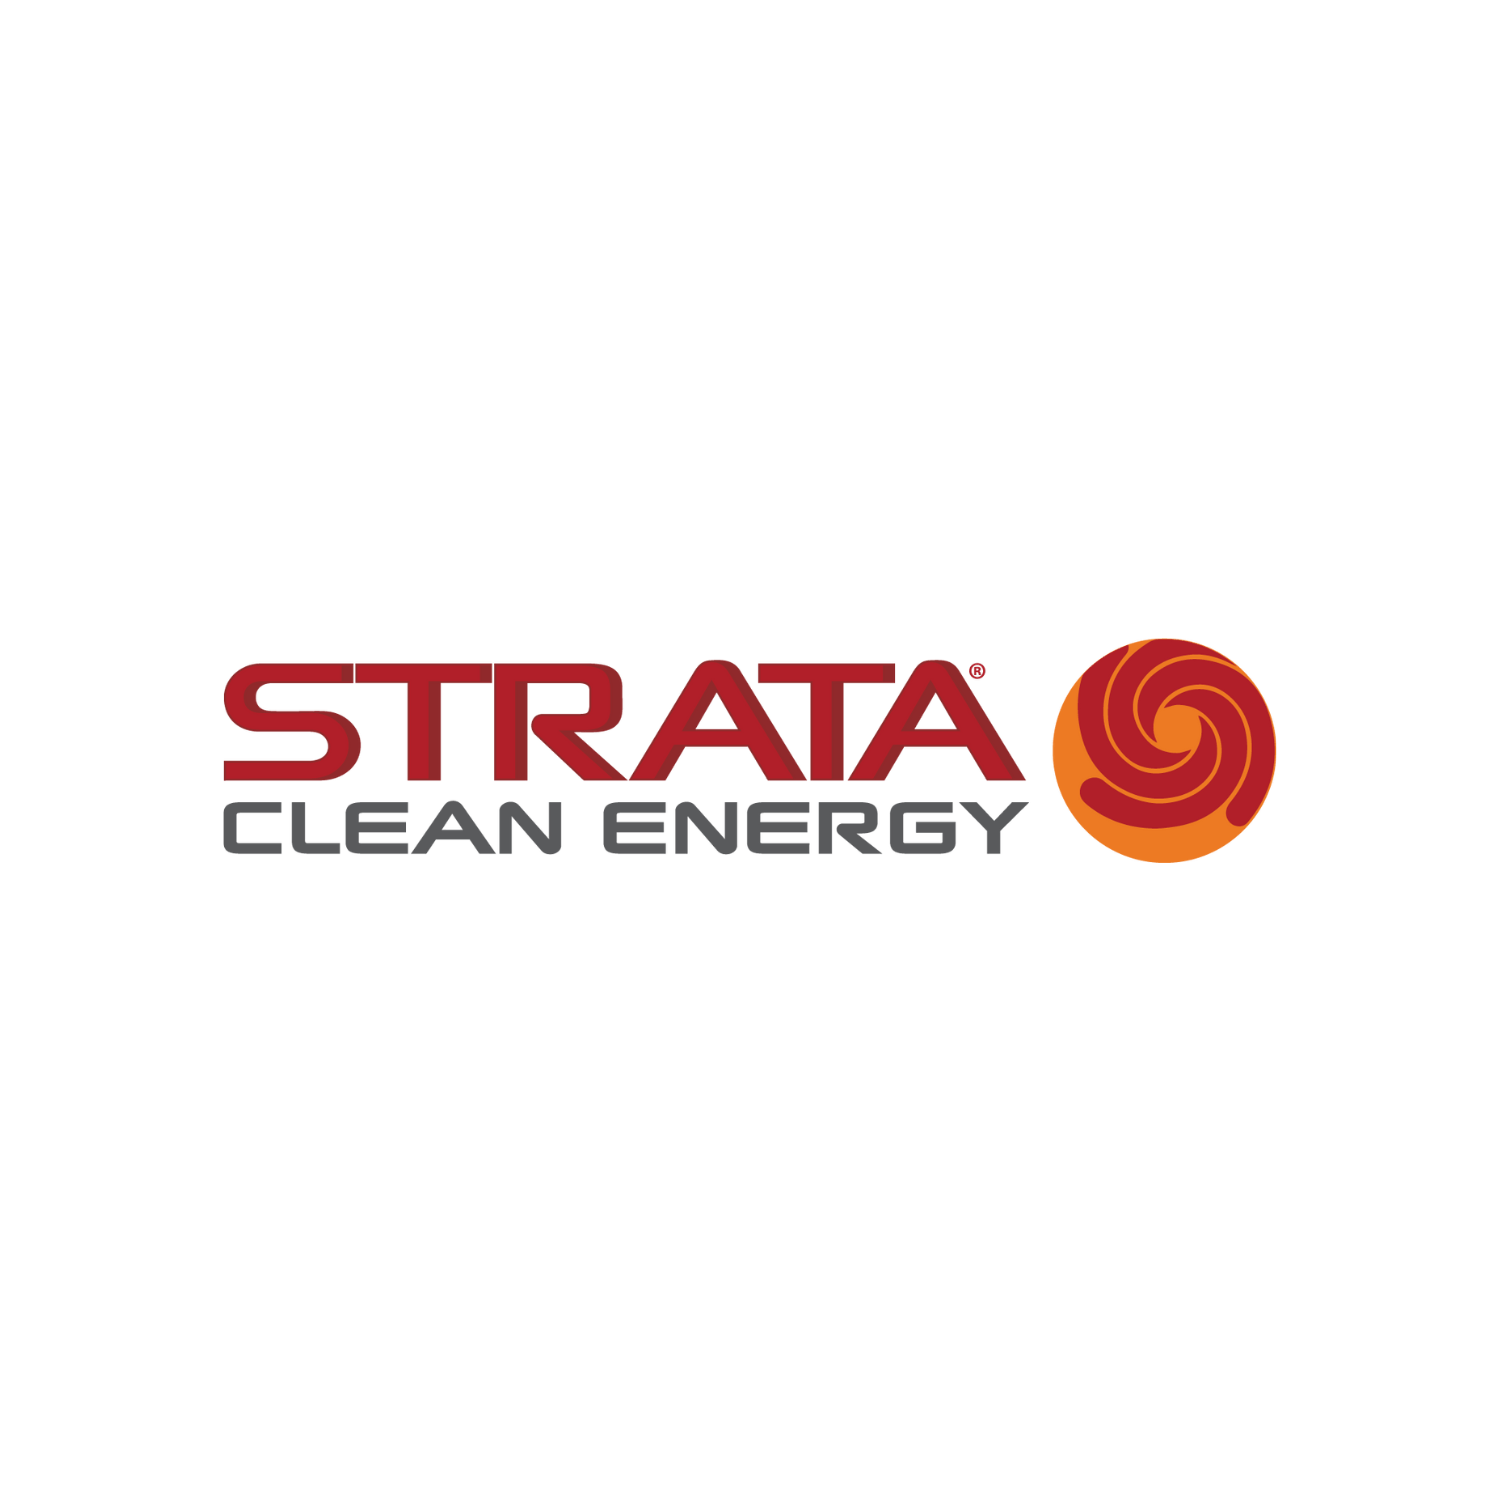 Resource Box Header Strata Clean Energy Secures a $300 Million Revolving Credit Facility to Support Expansion of Vertically Integrated Clean Energy Platform